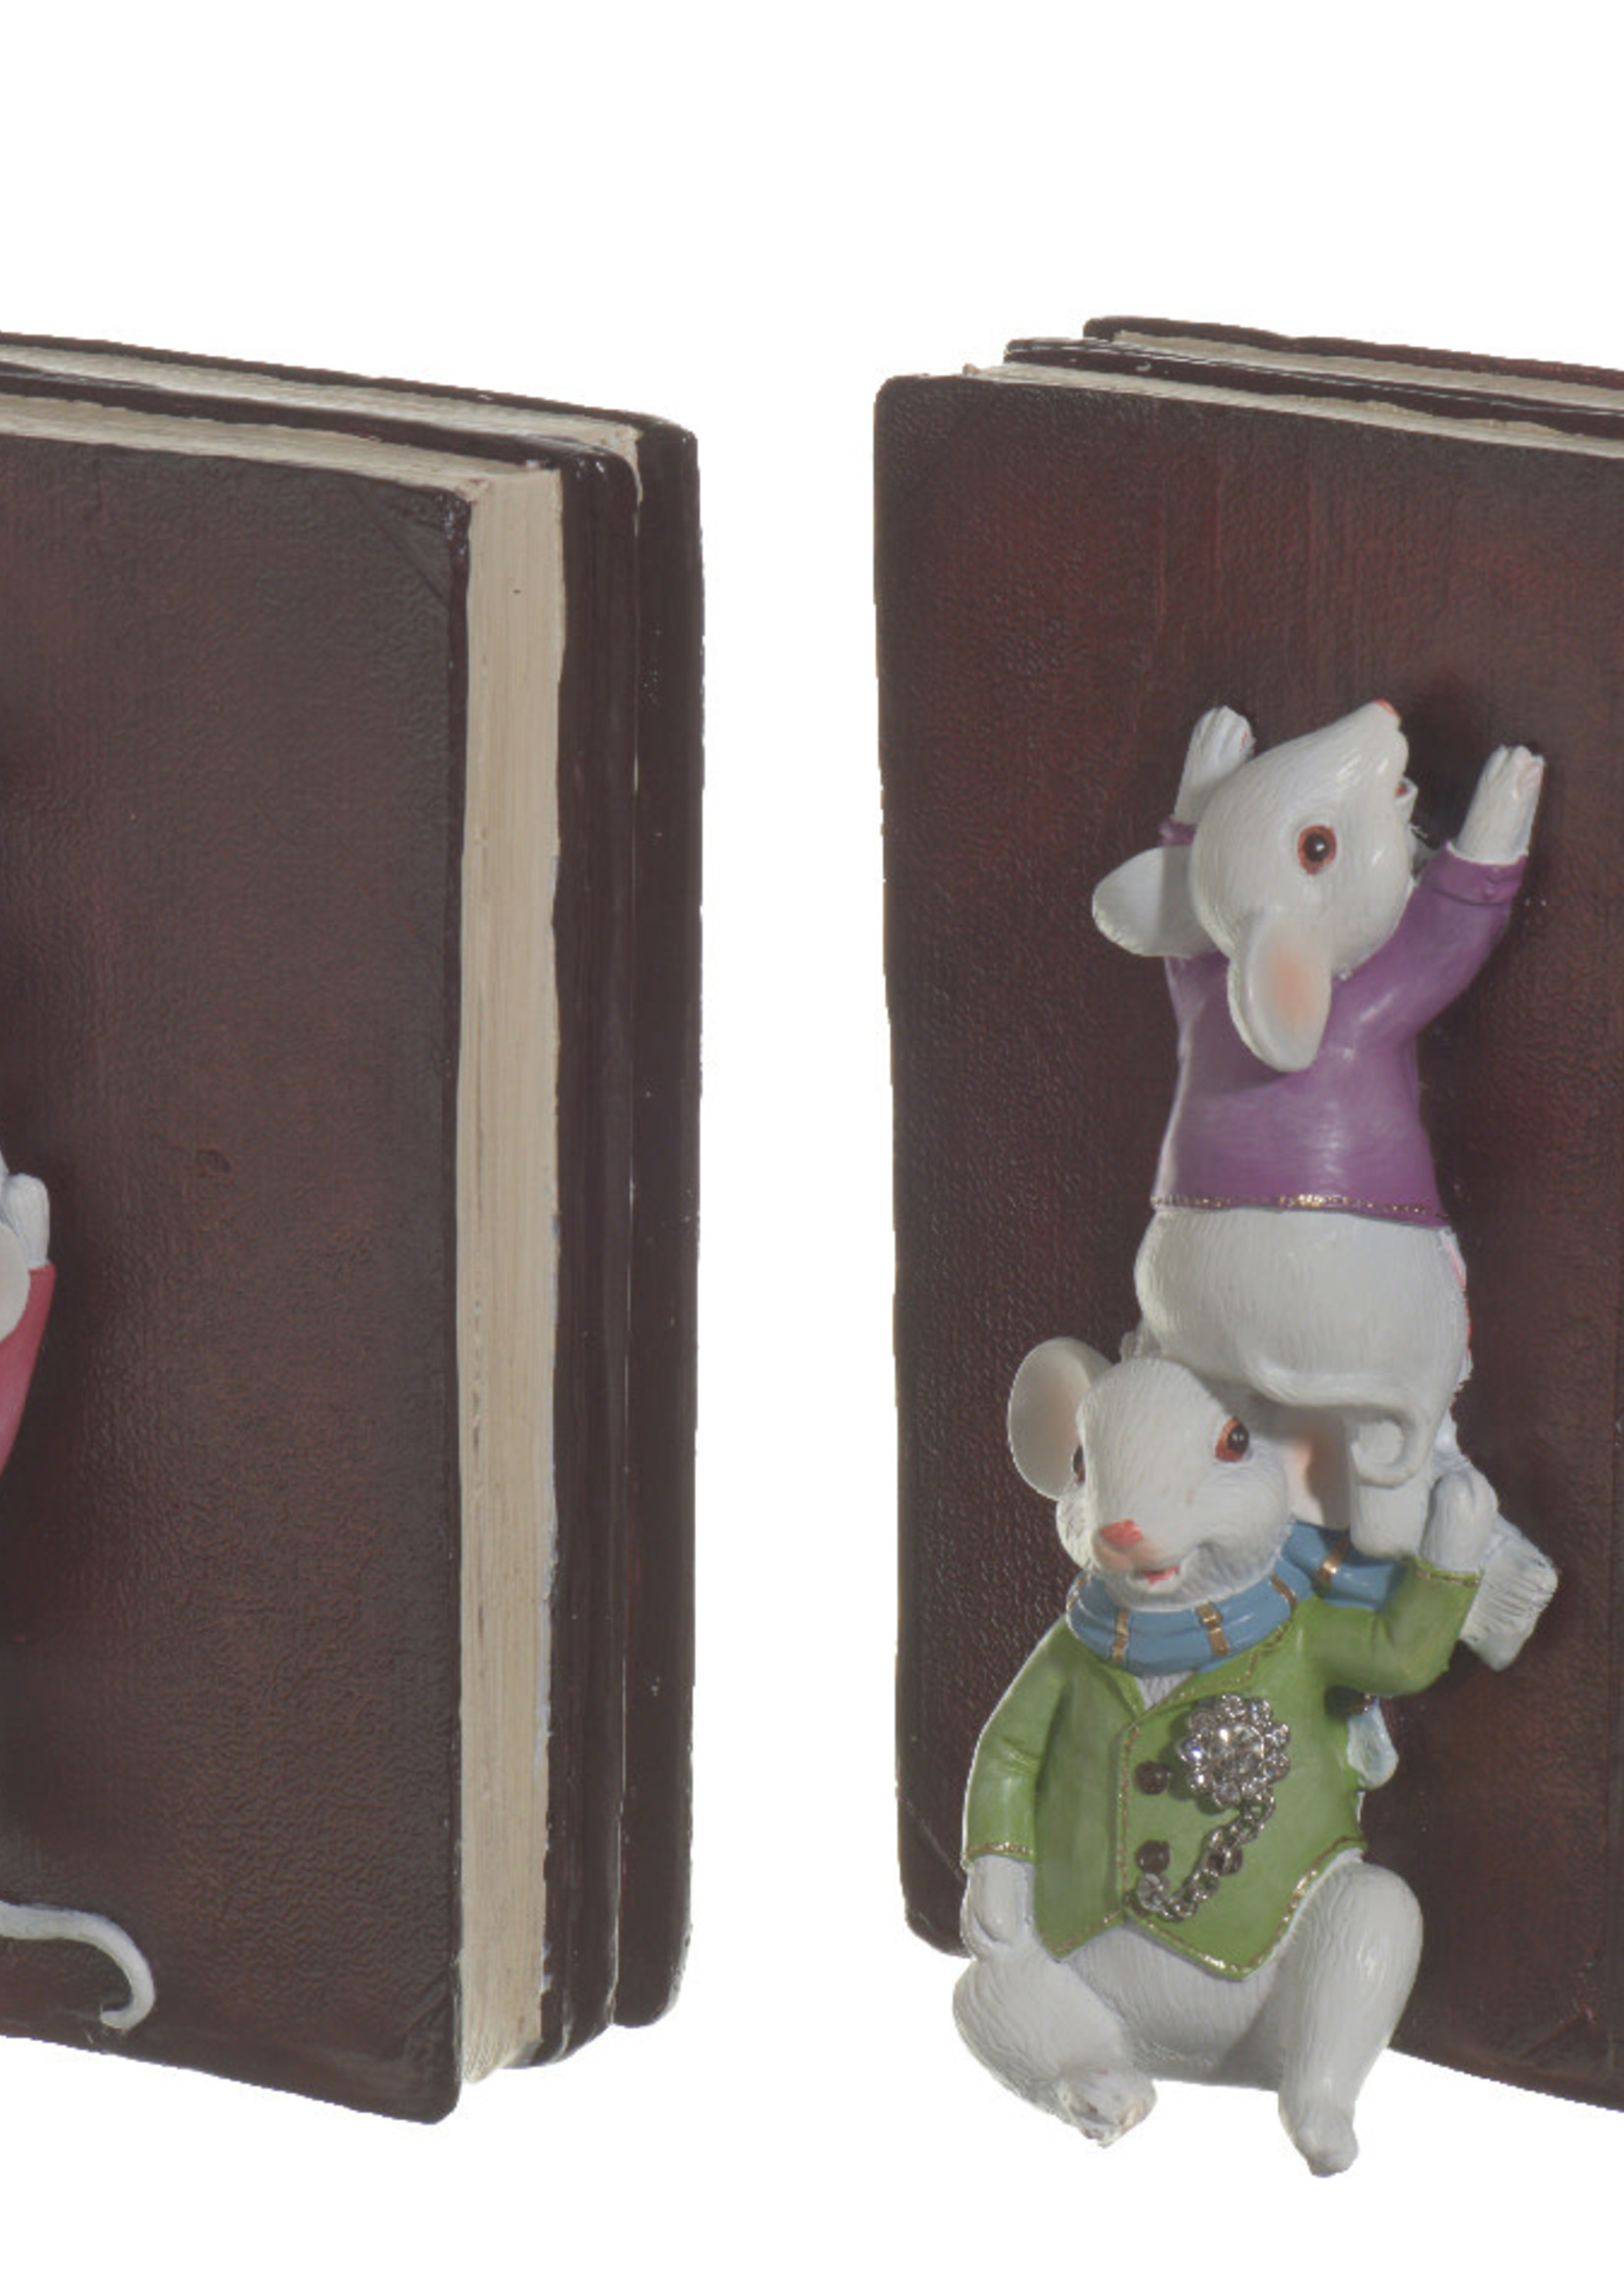 Kaemingkx6 Mouses bookends with cute mice climbing